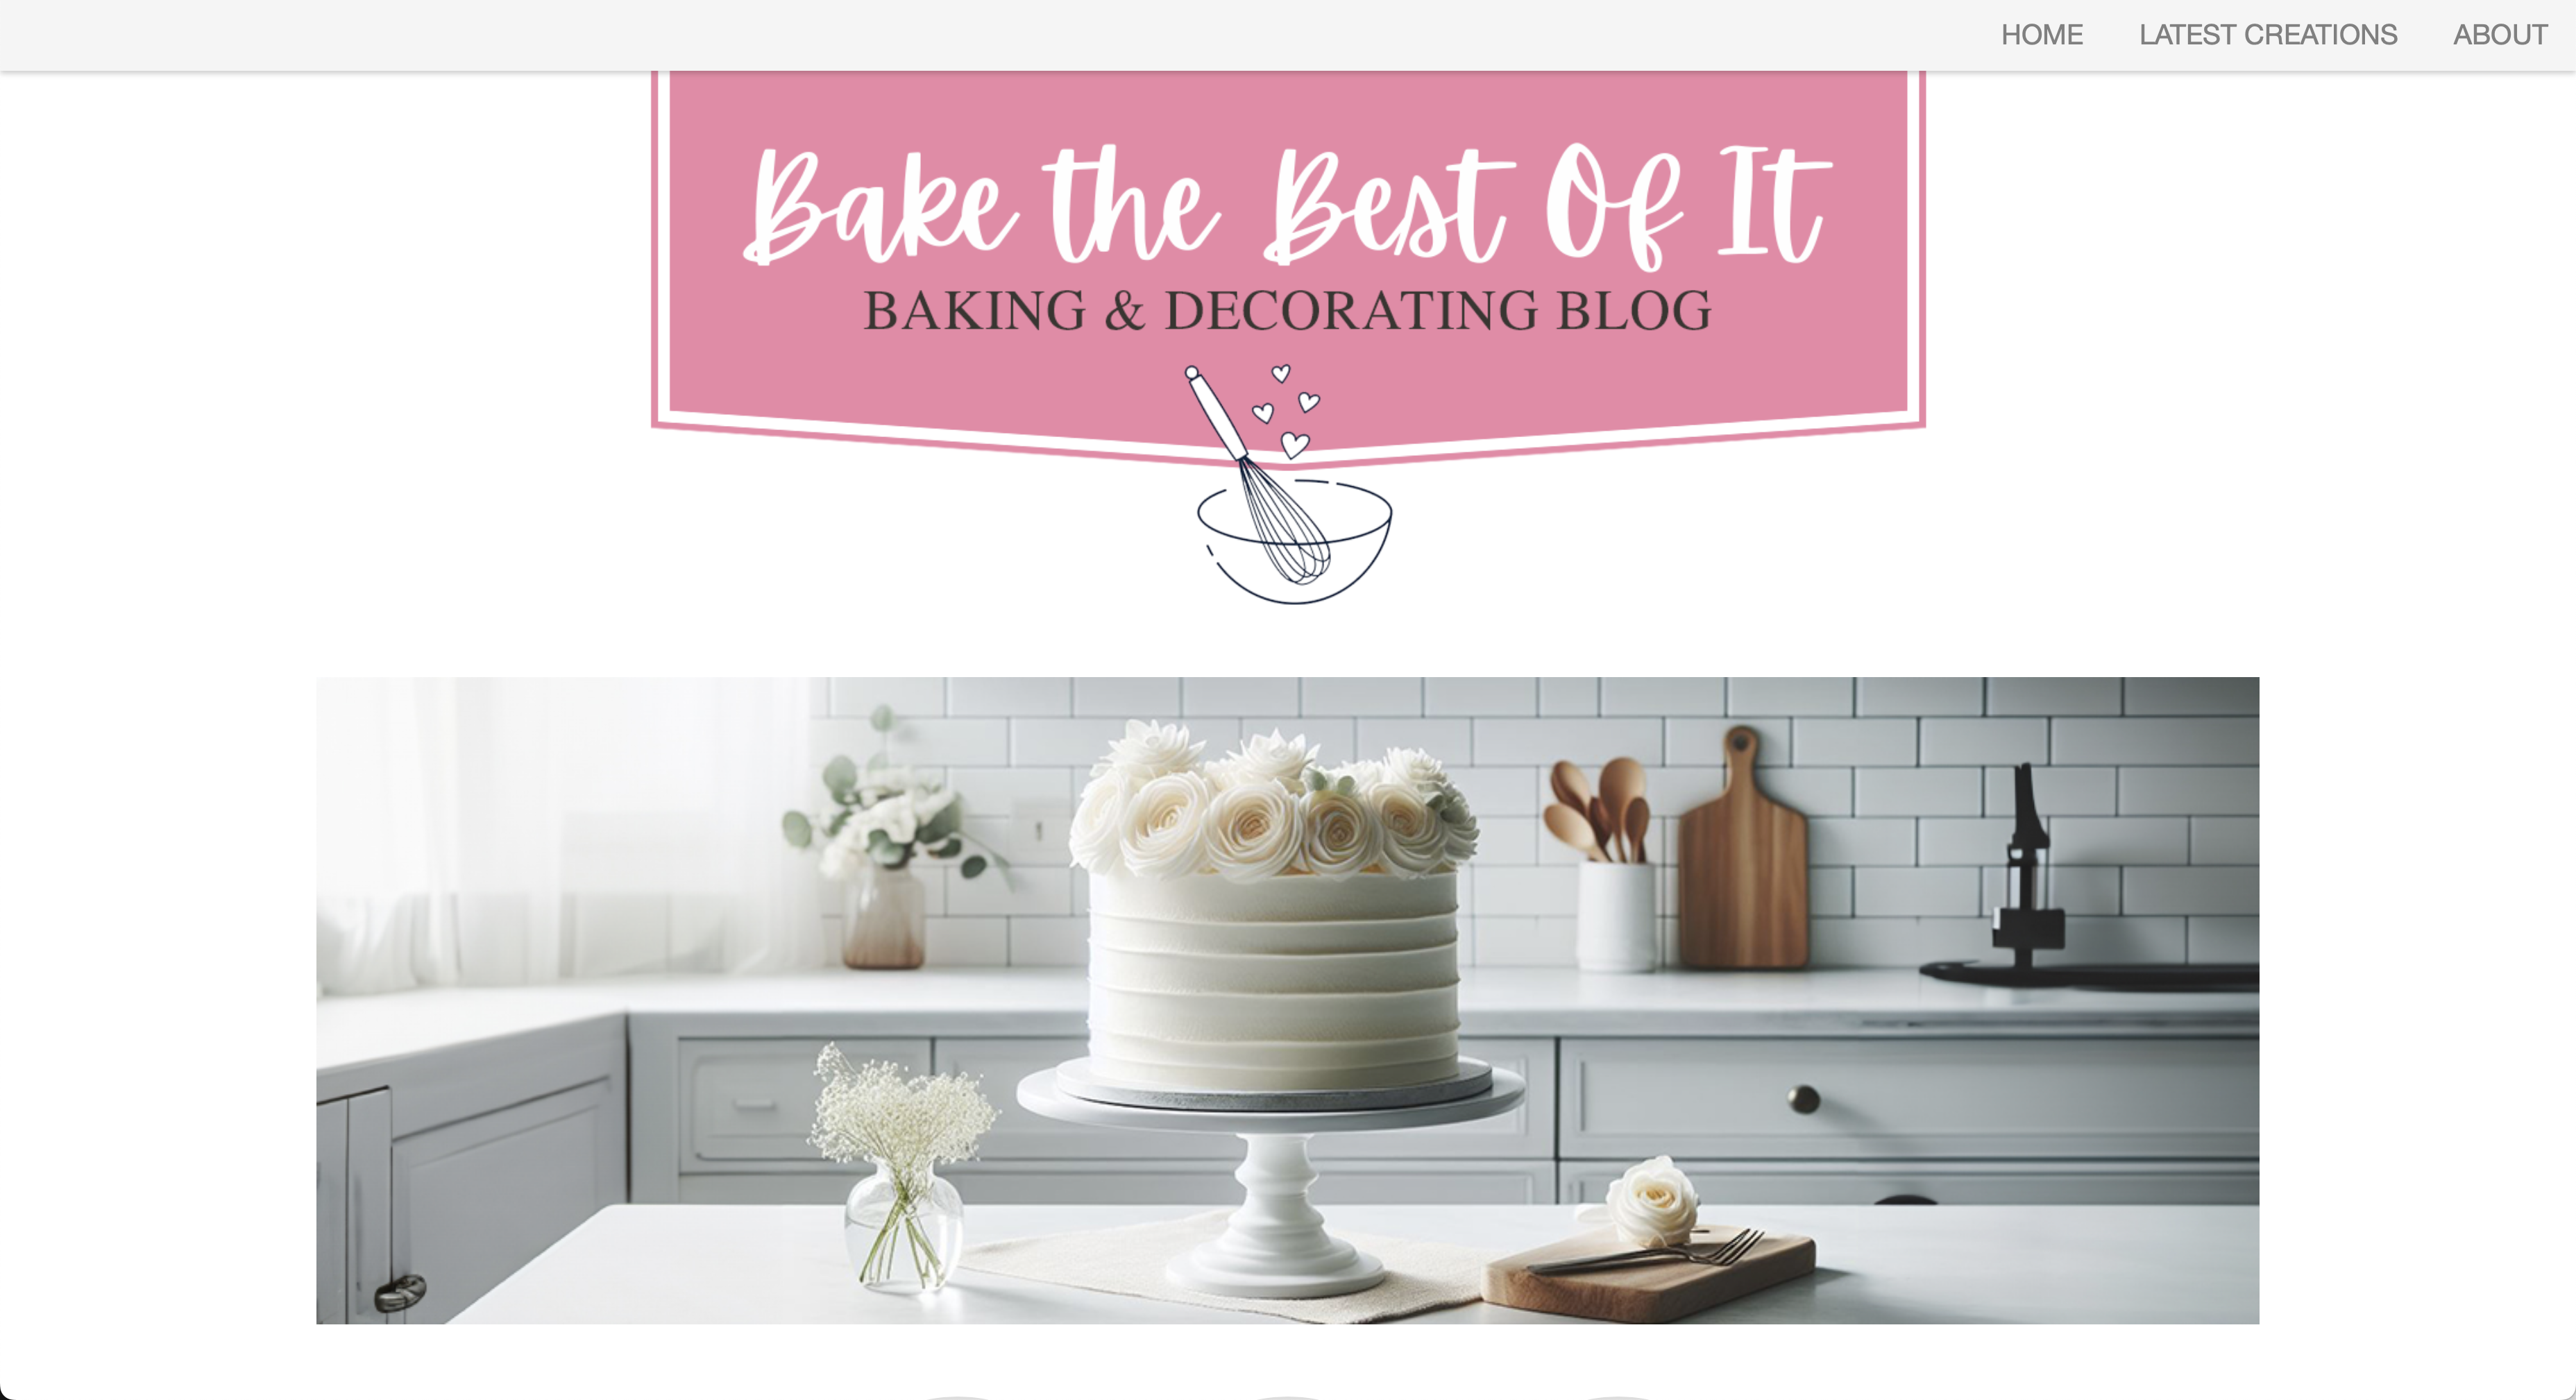 Bake the Best of It - WordPress Site Hosted On AWS